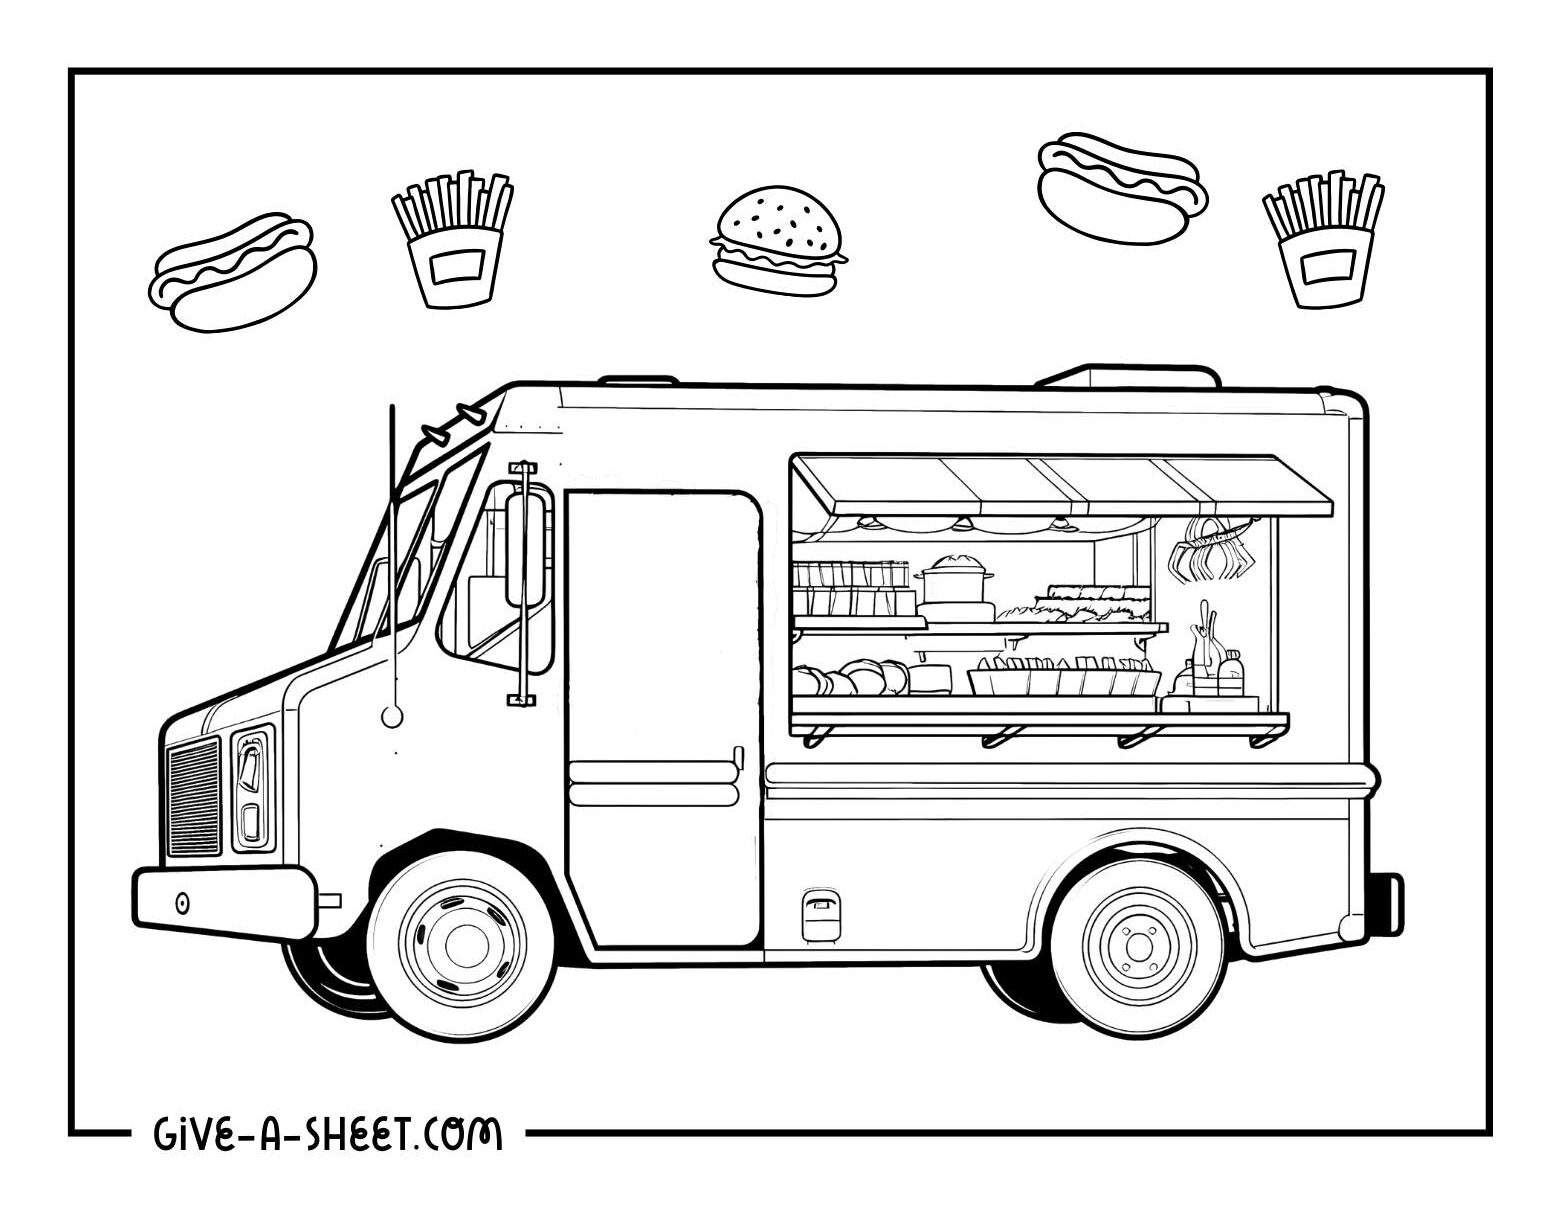 Food truck coloring page for kids.